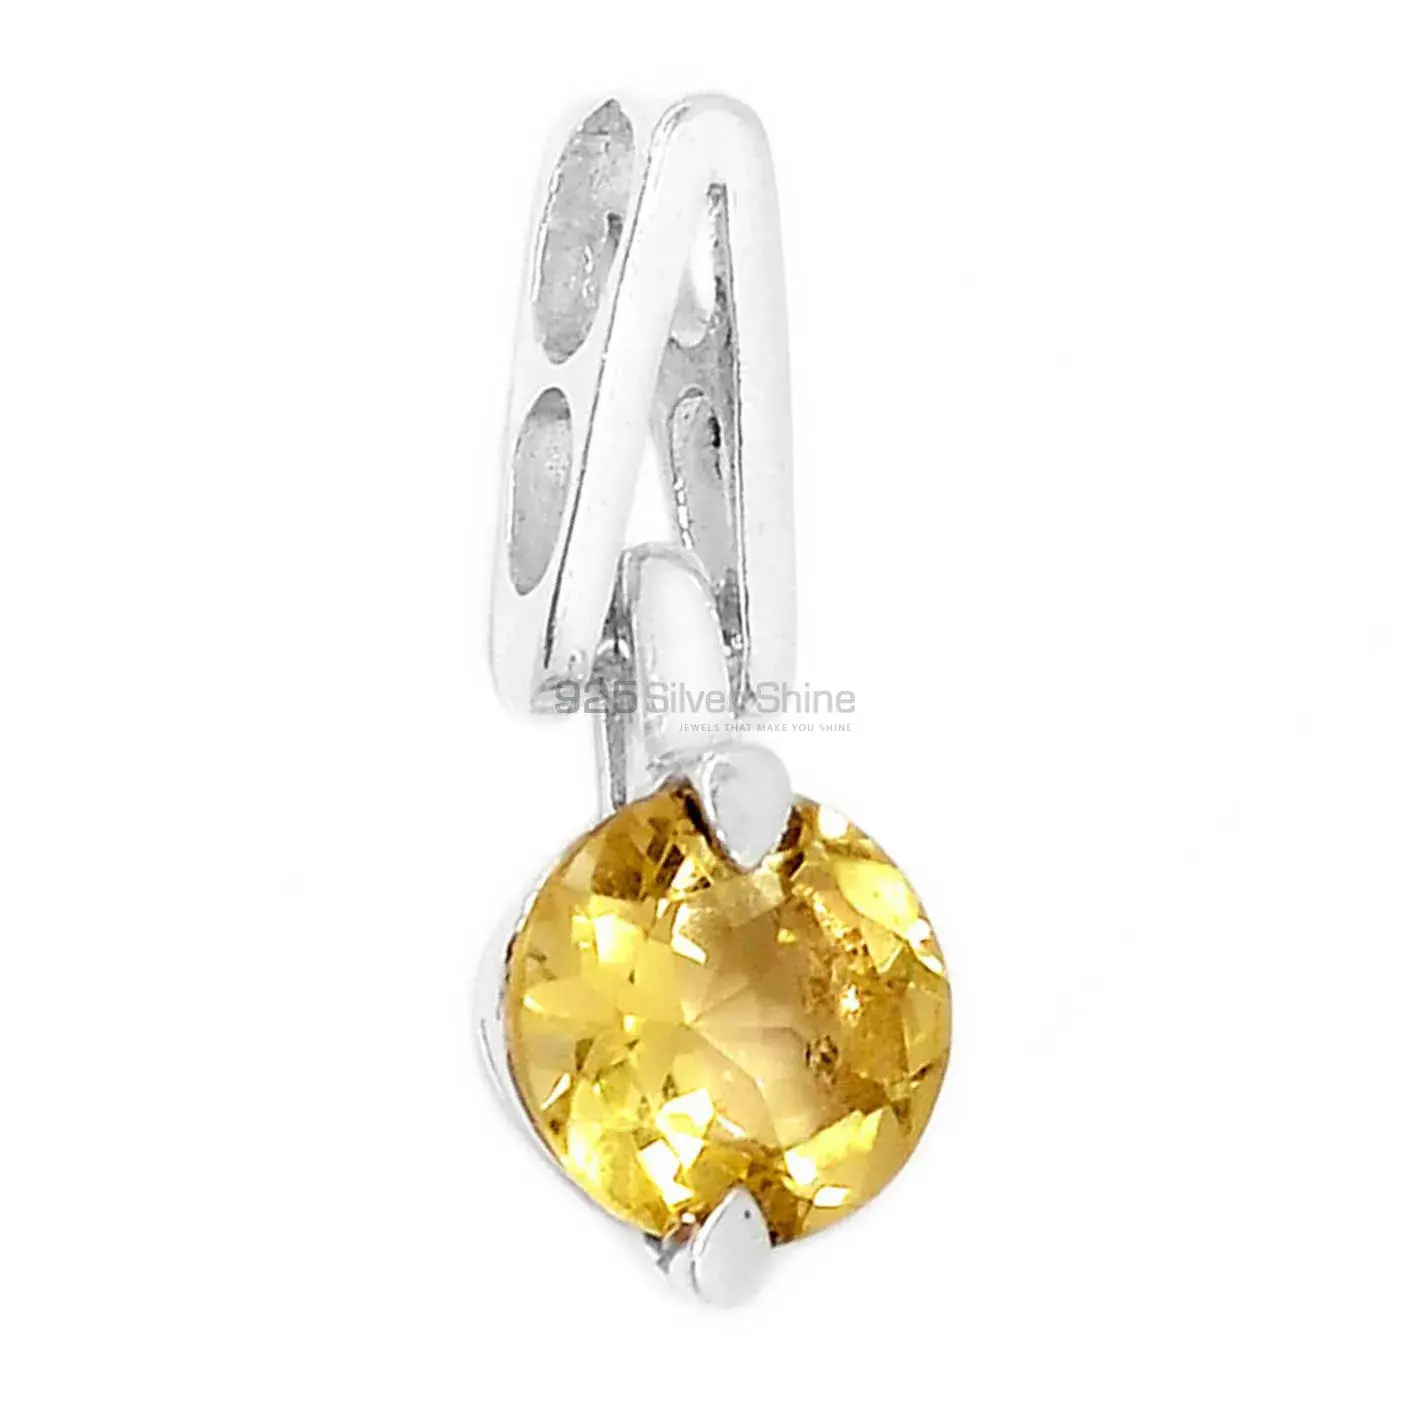 Solid Sterling Silver Top Quality Pendants In Citrine Gemstone Jewelry 925SSP301-2_1